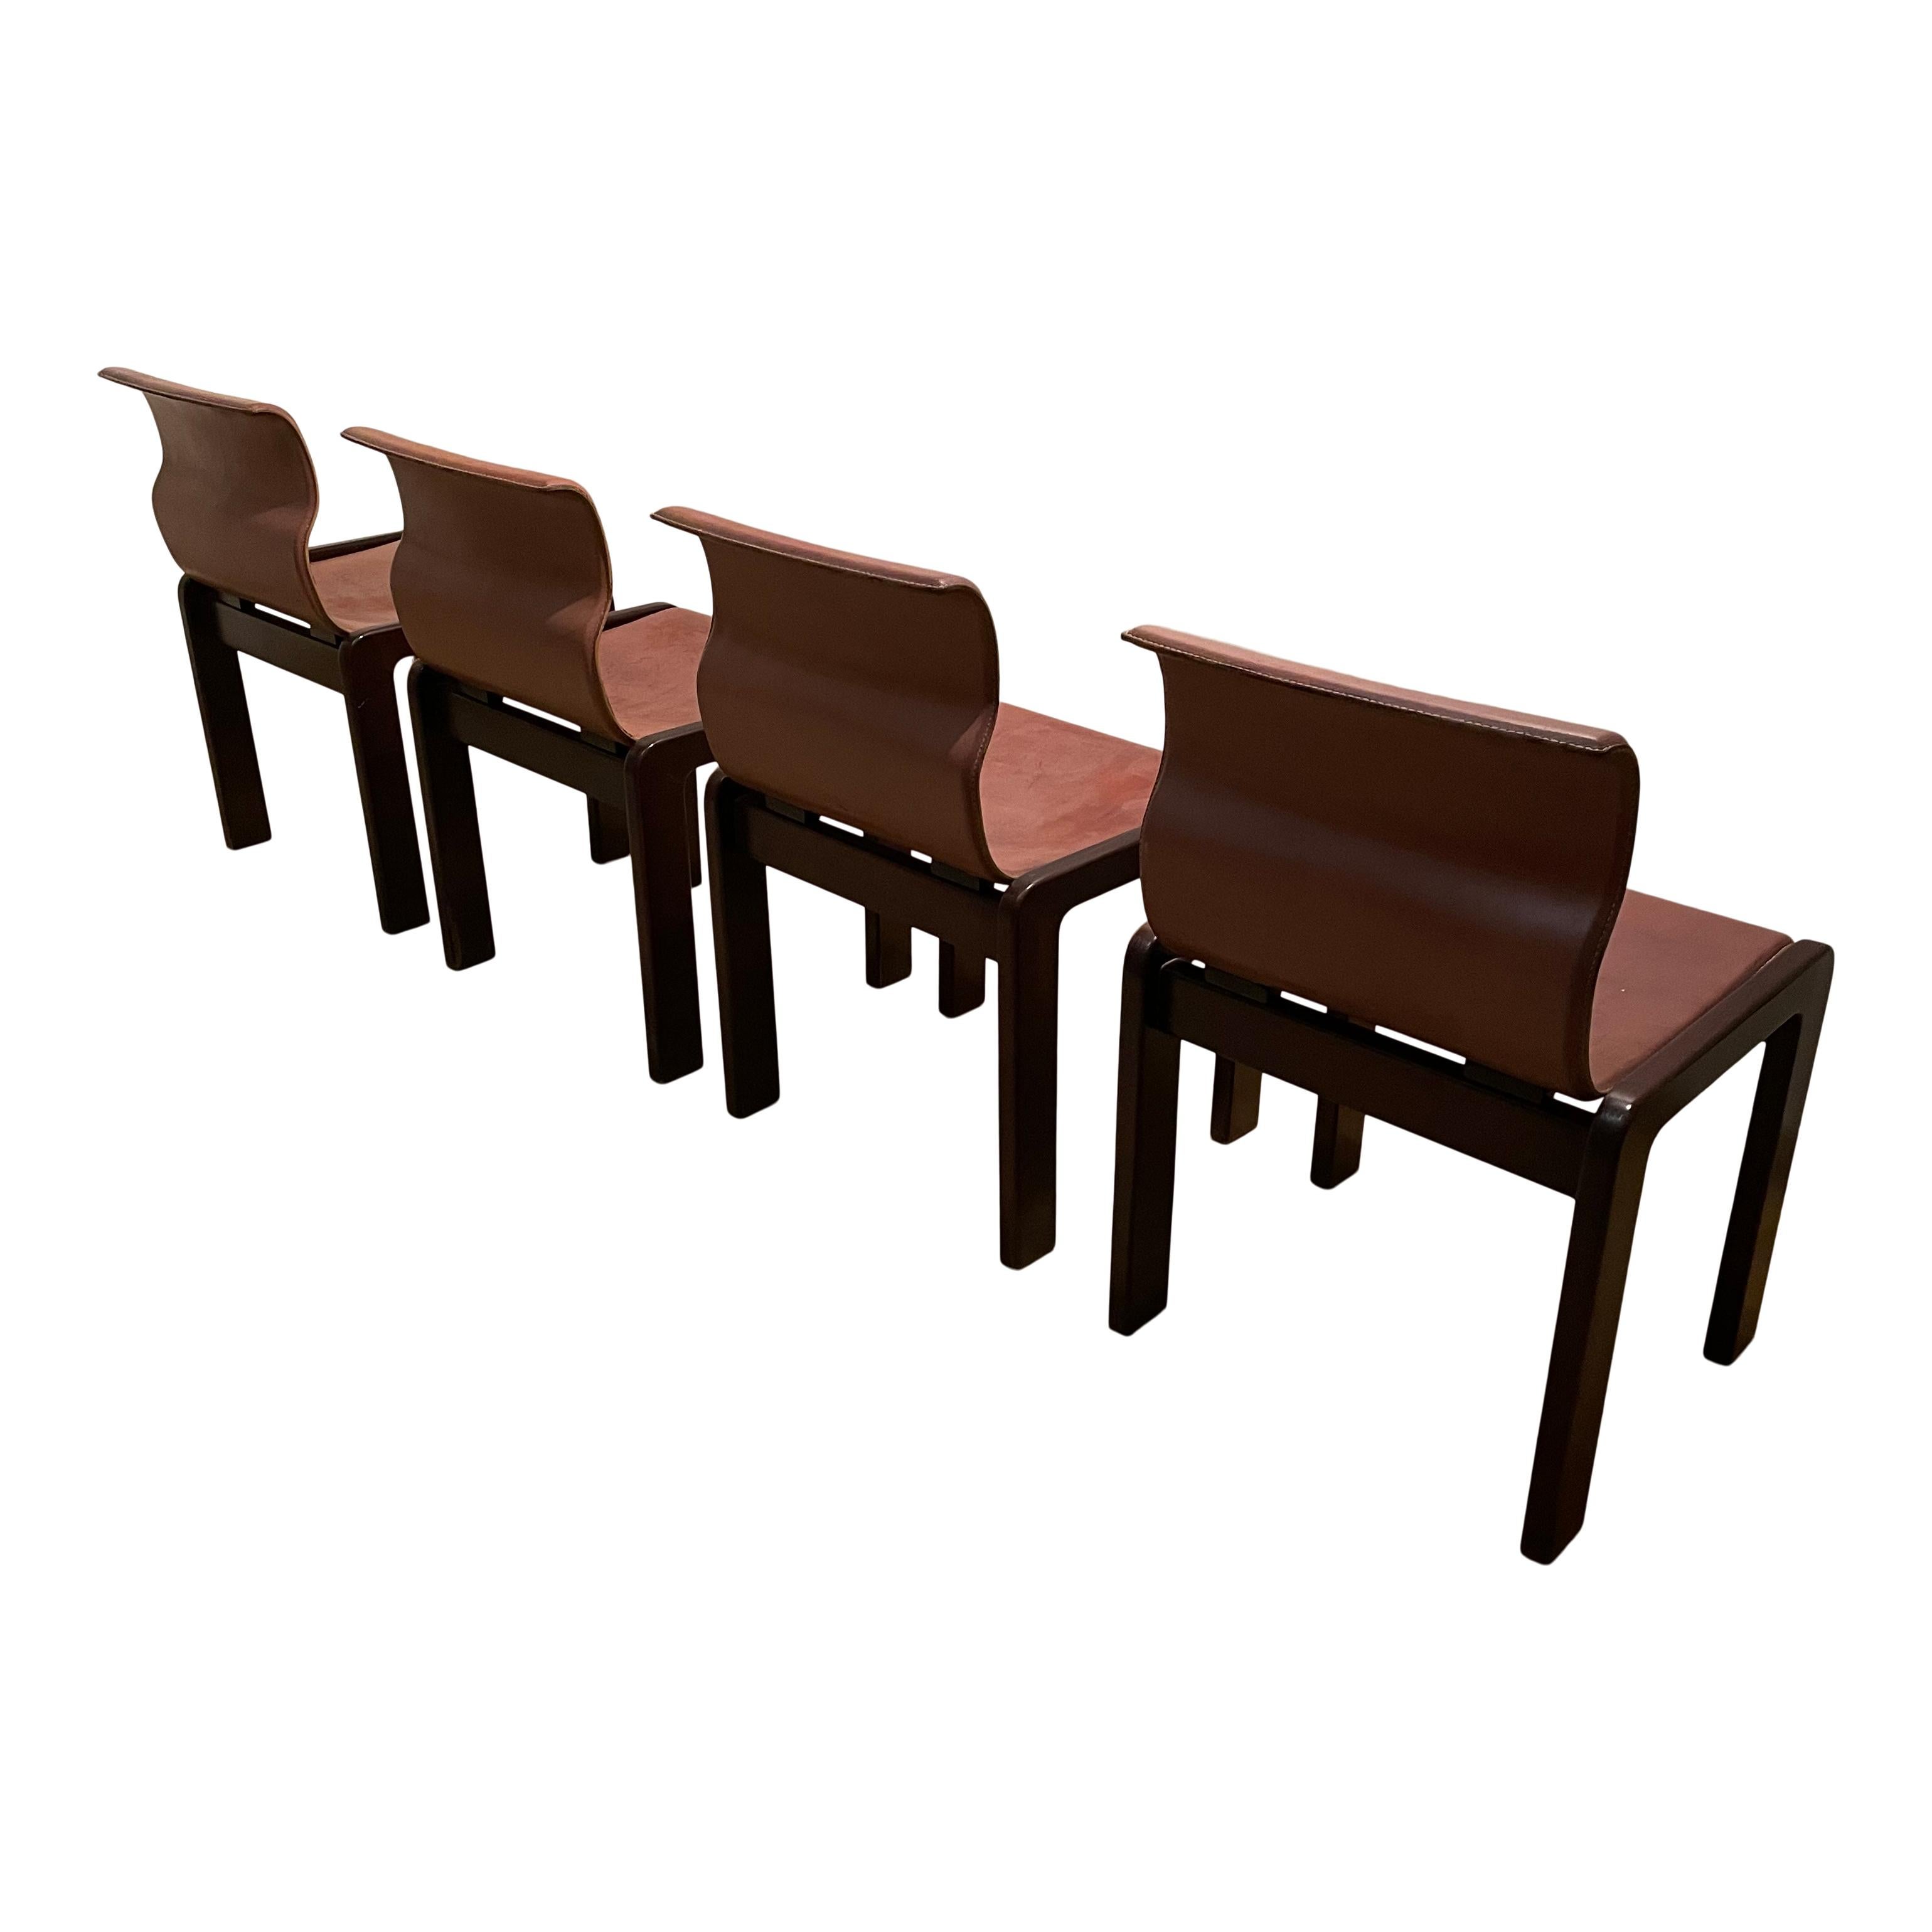 Italian Afra & Tobia Scarpa Midcentury Leather and Plywood Dining Chair, 1966, Set of 4 For Sale